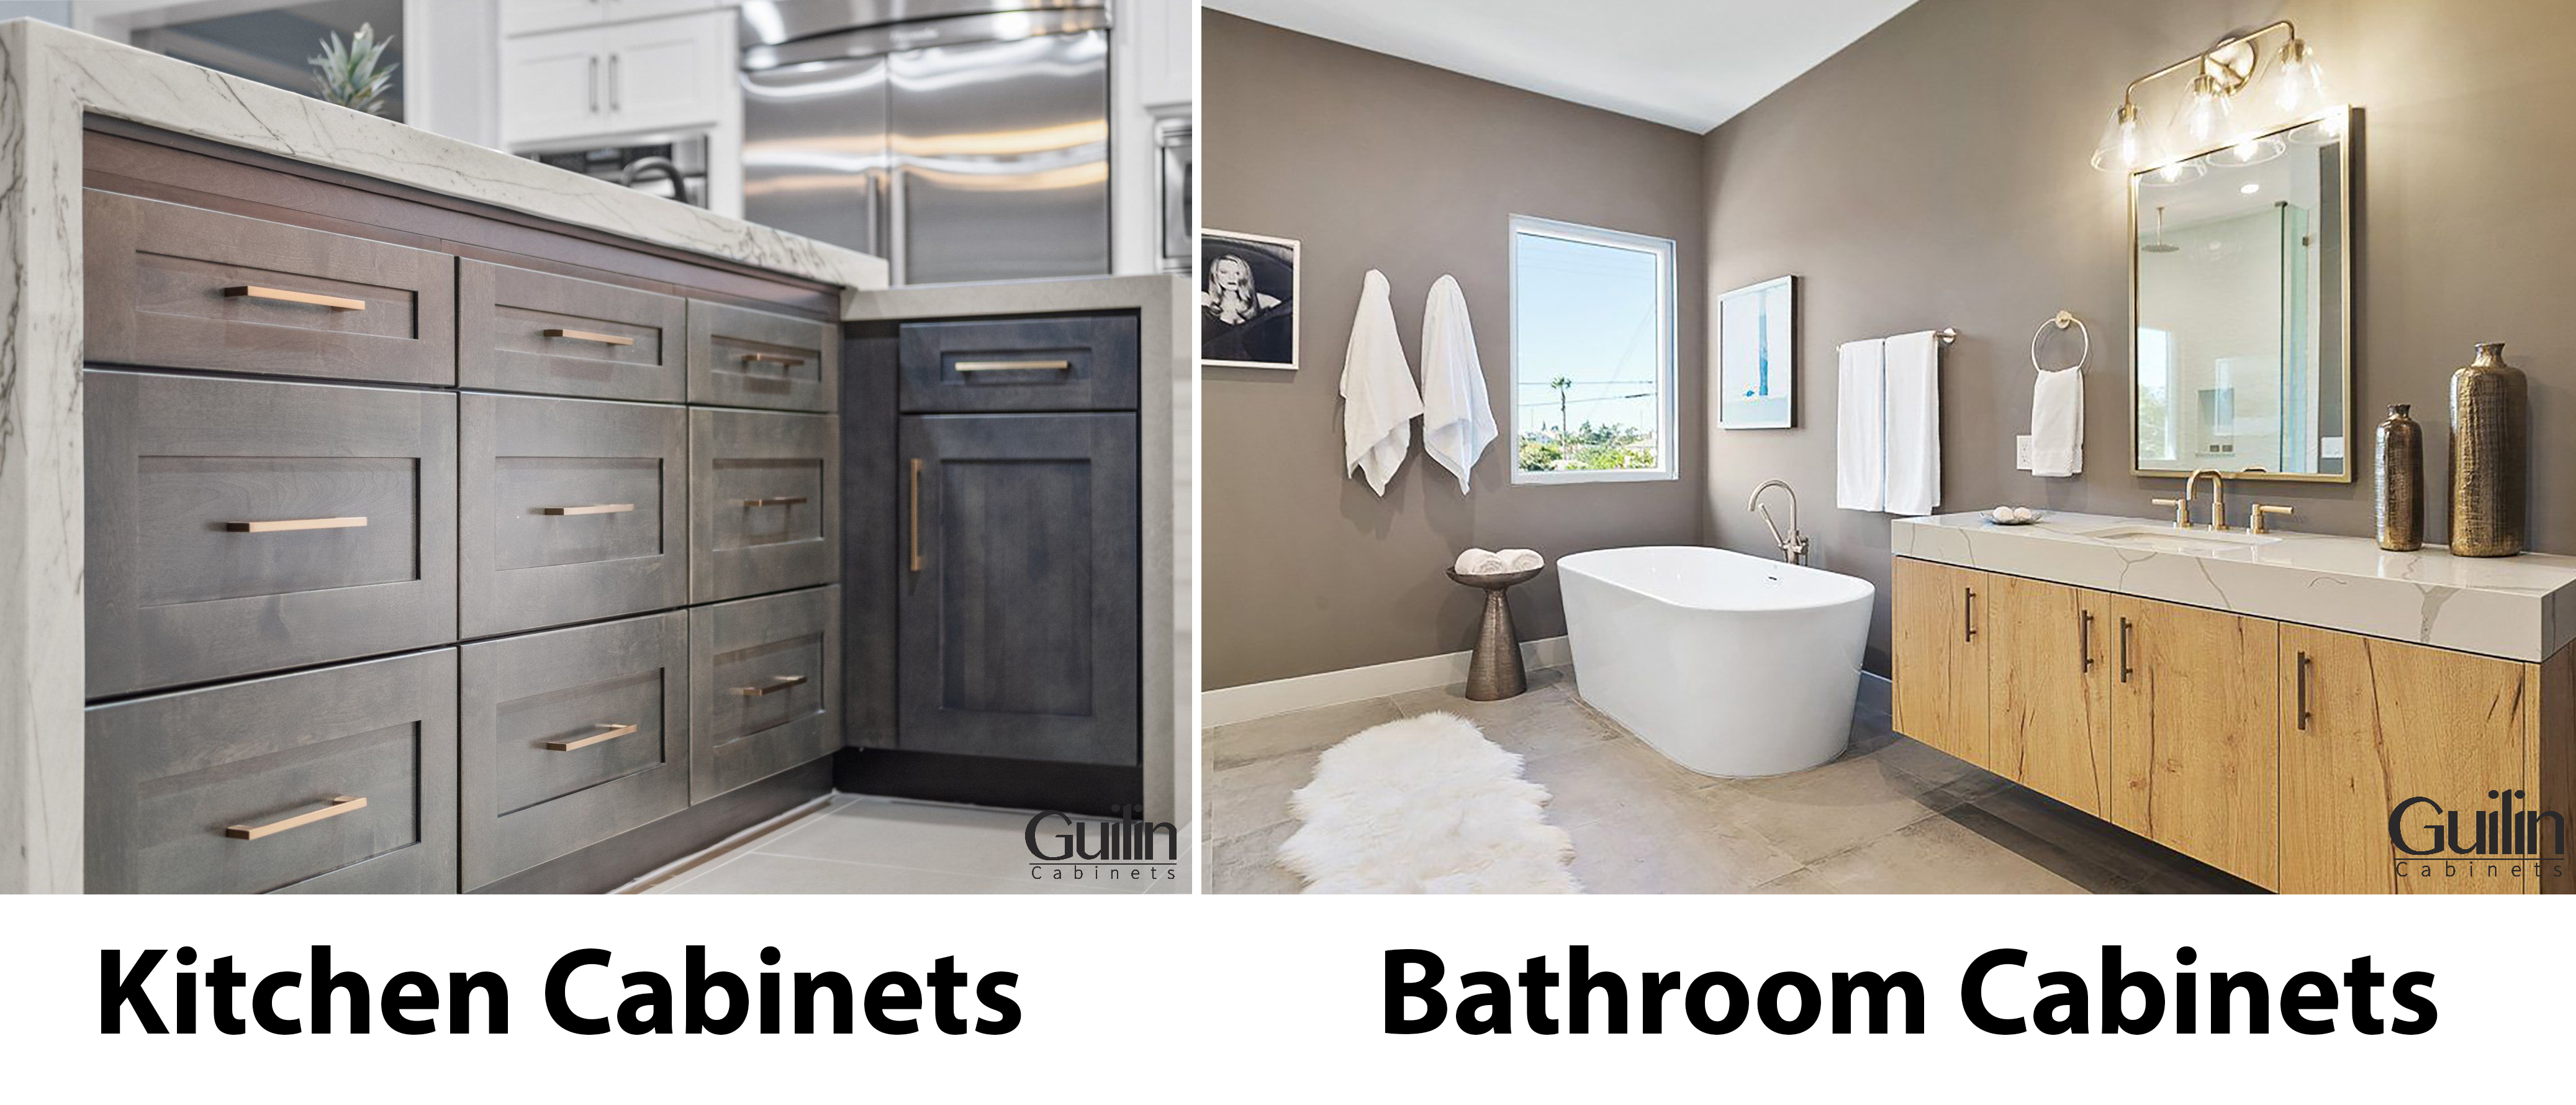 Difference Between Kitchen VS Bathroom Cabinets: